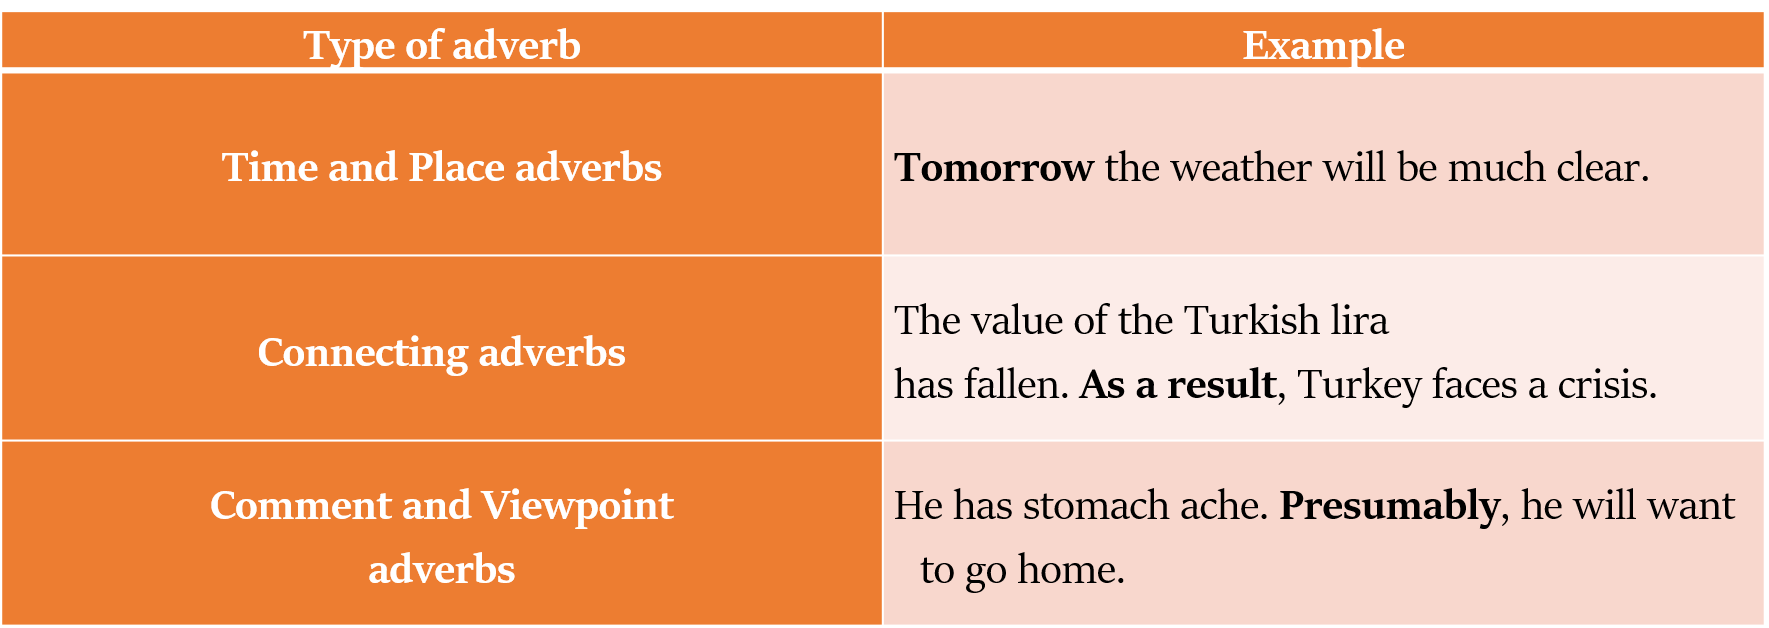 position of adverbs